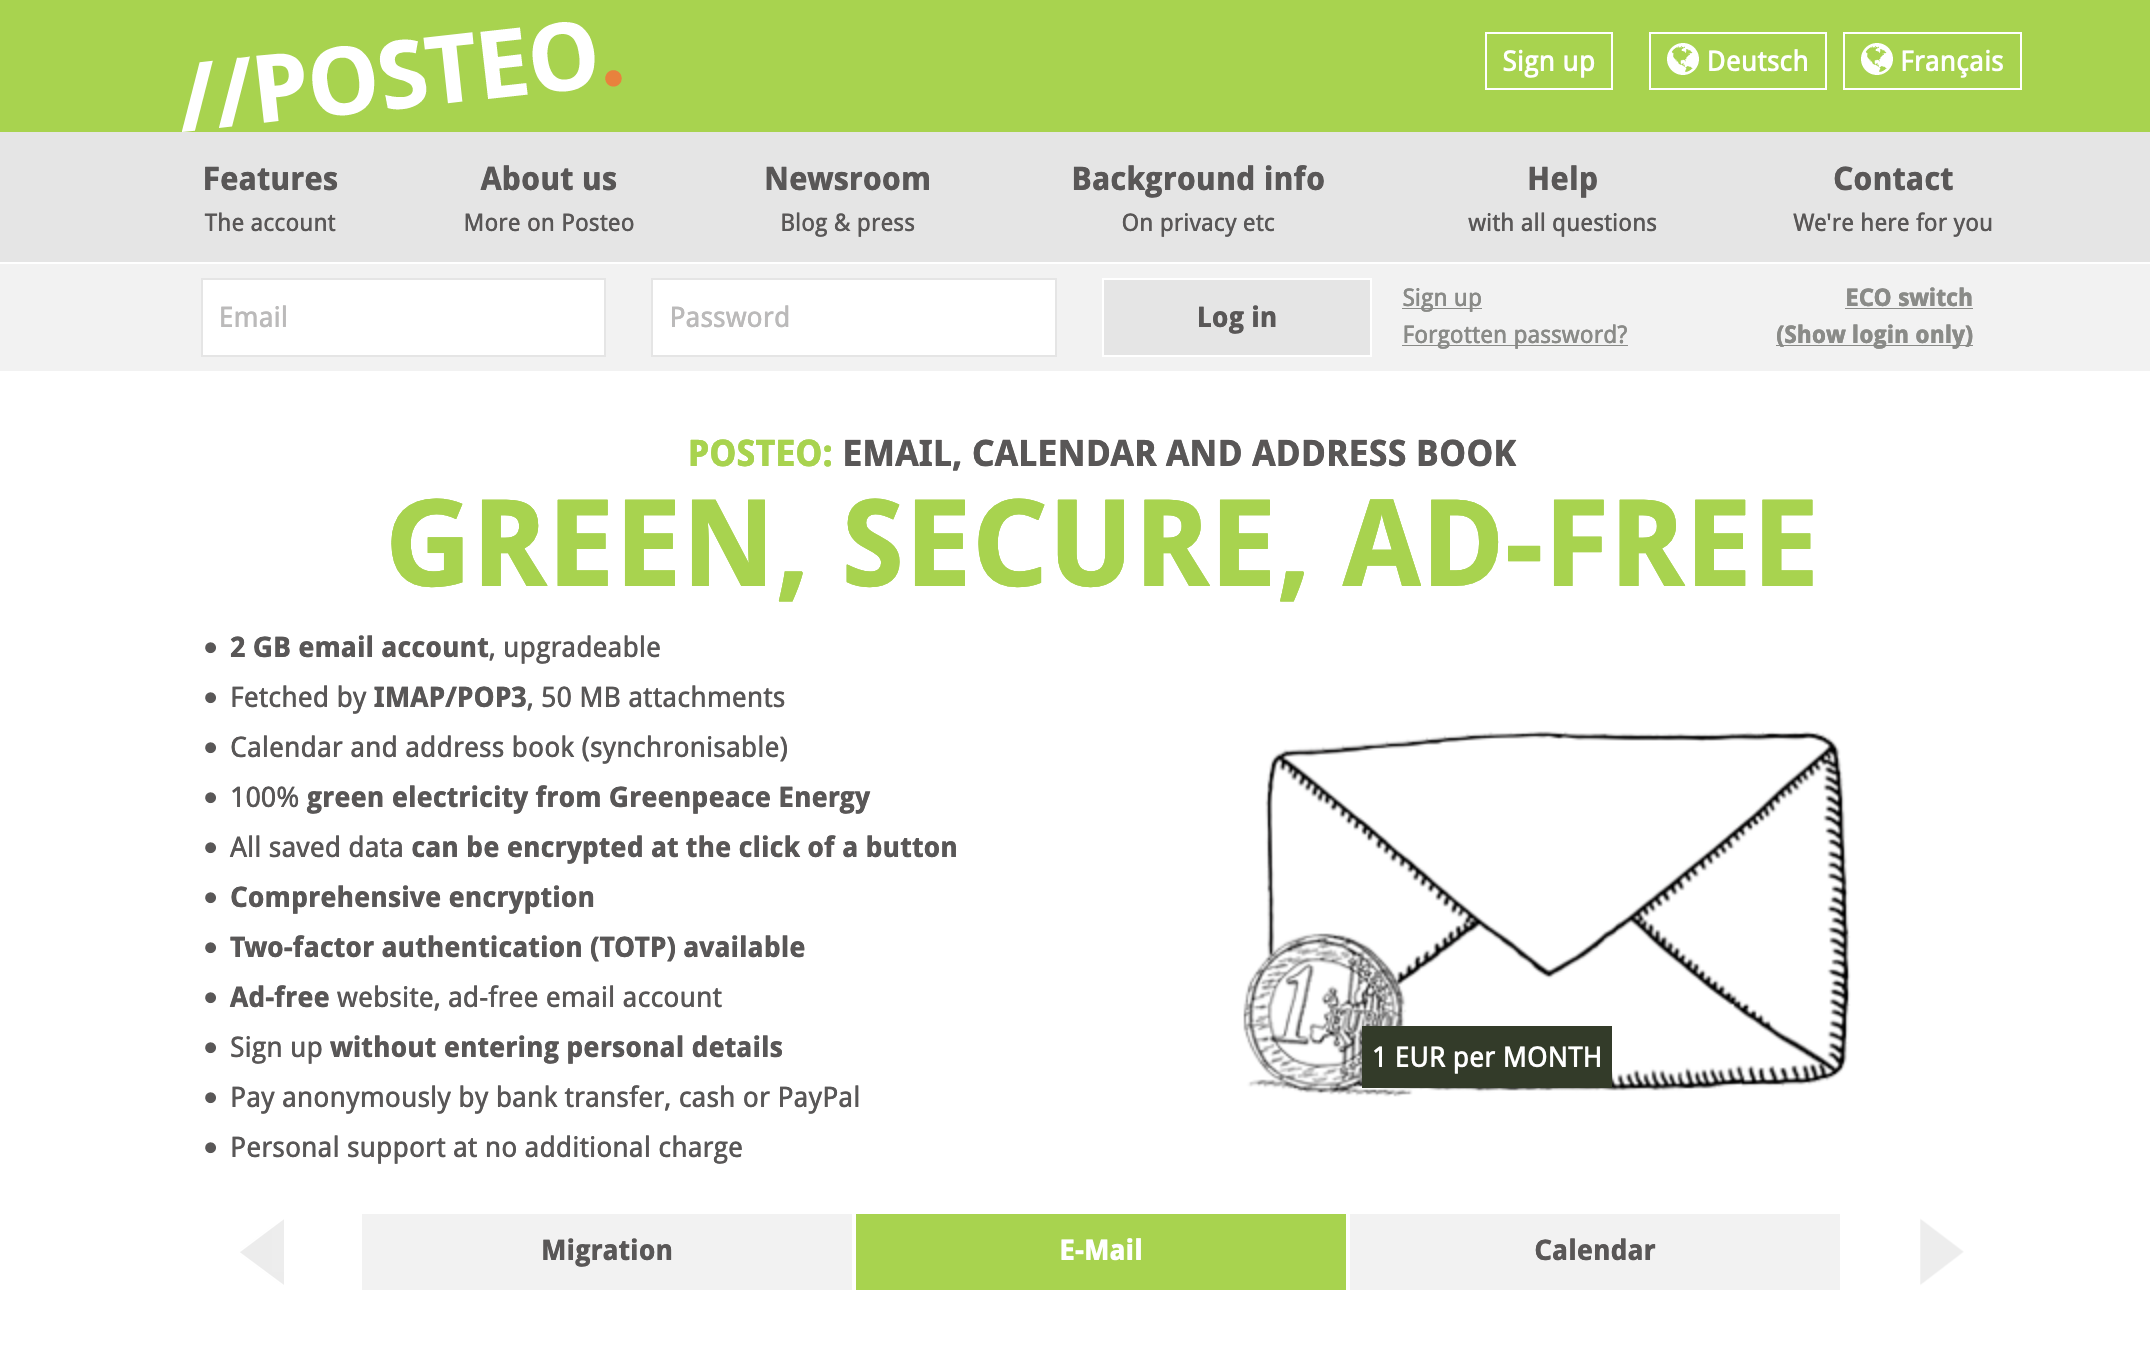 Image of the posteo landing page